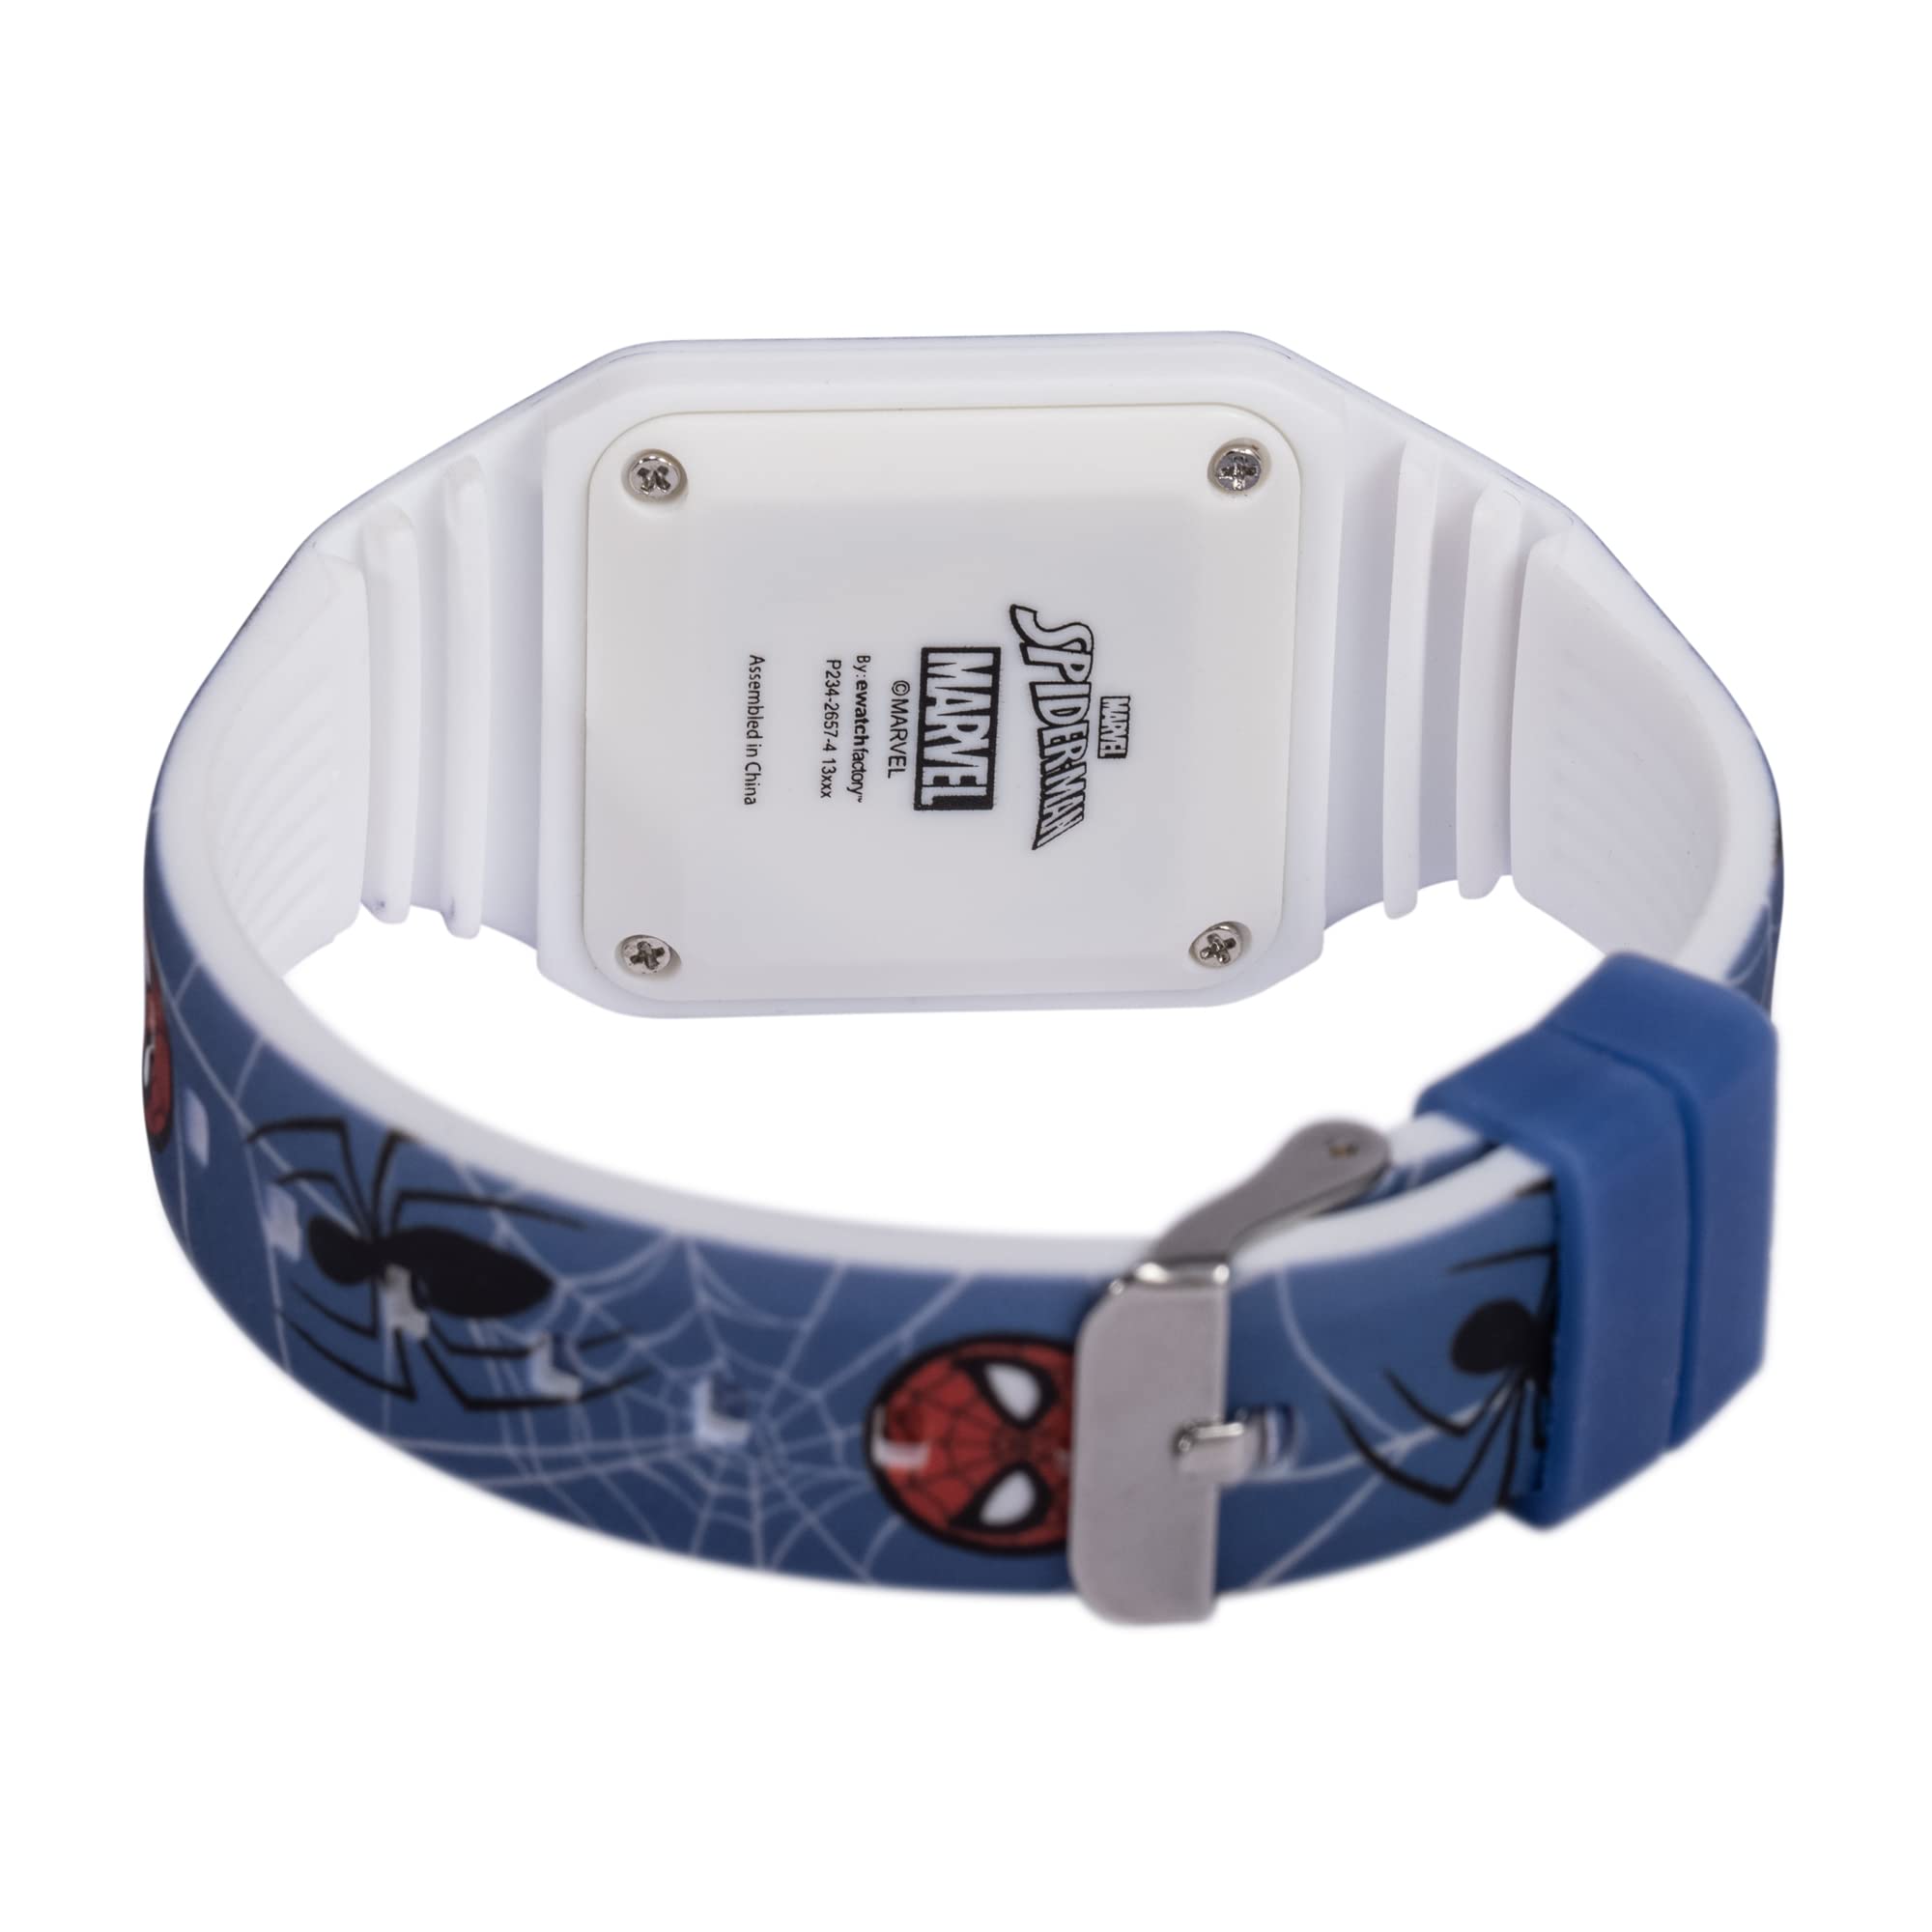 Marvel Kids LED Digtal Display Watch with Allover Graphics Strap